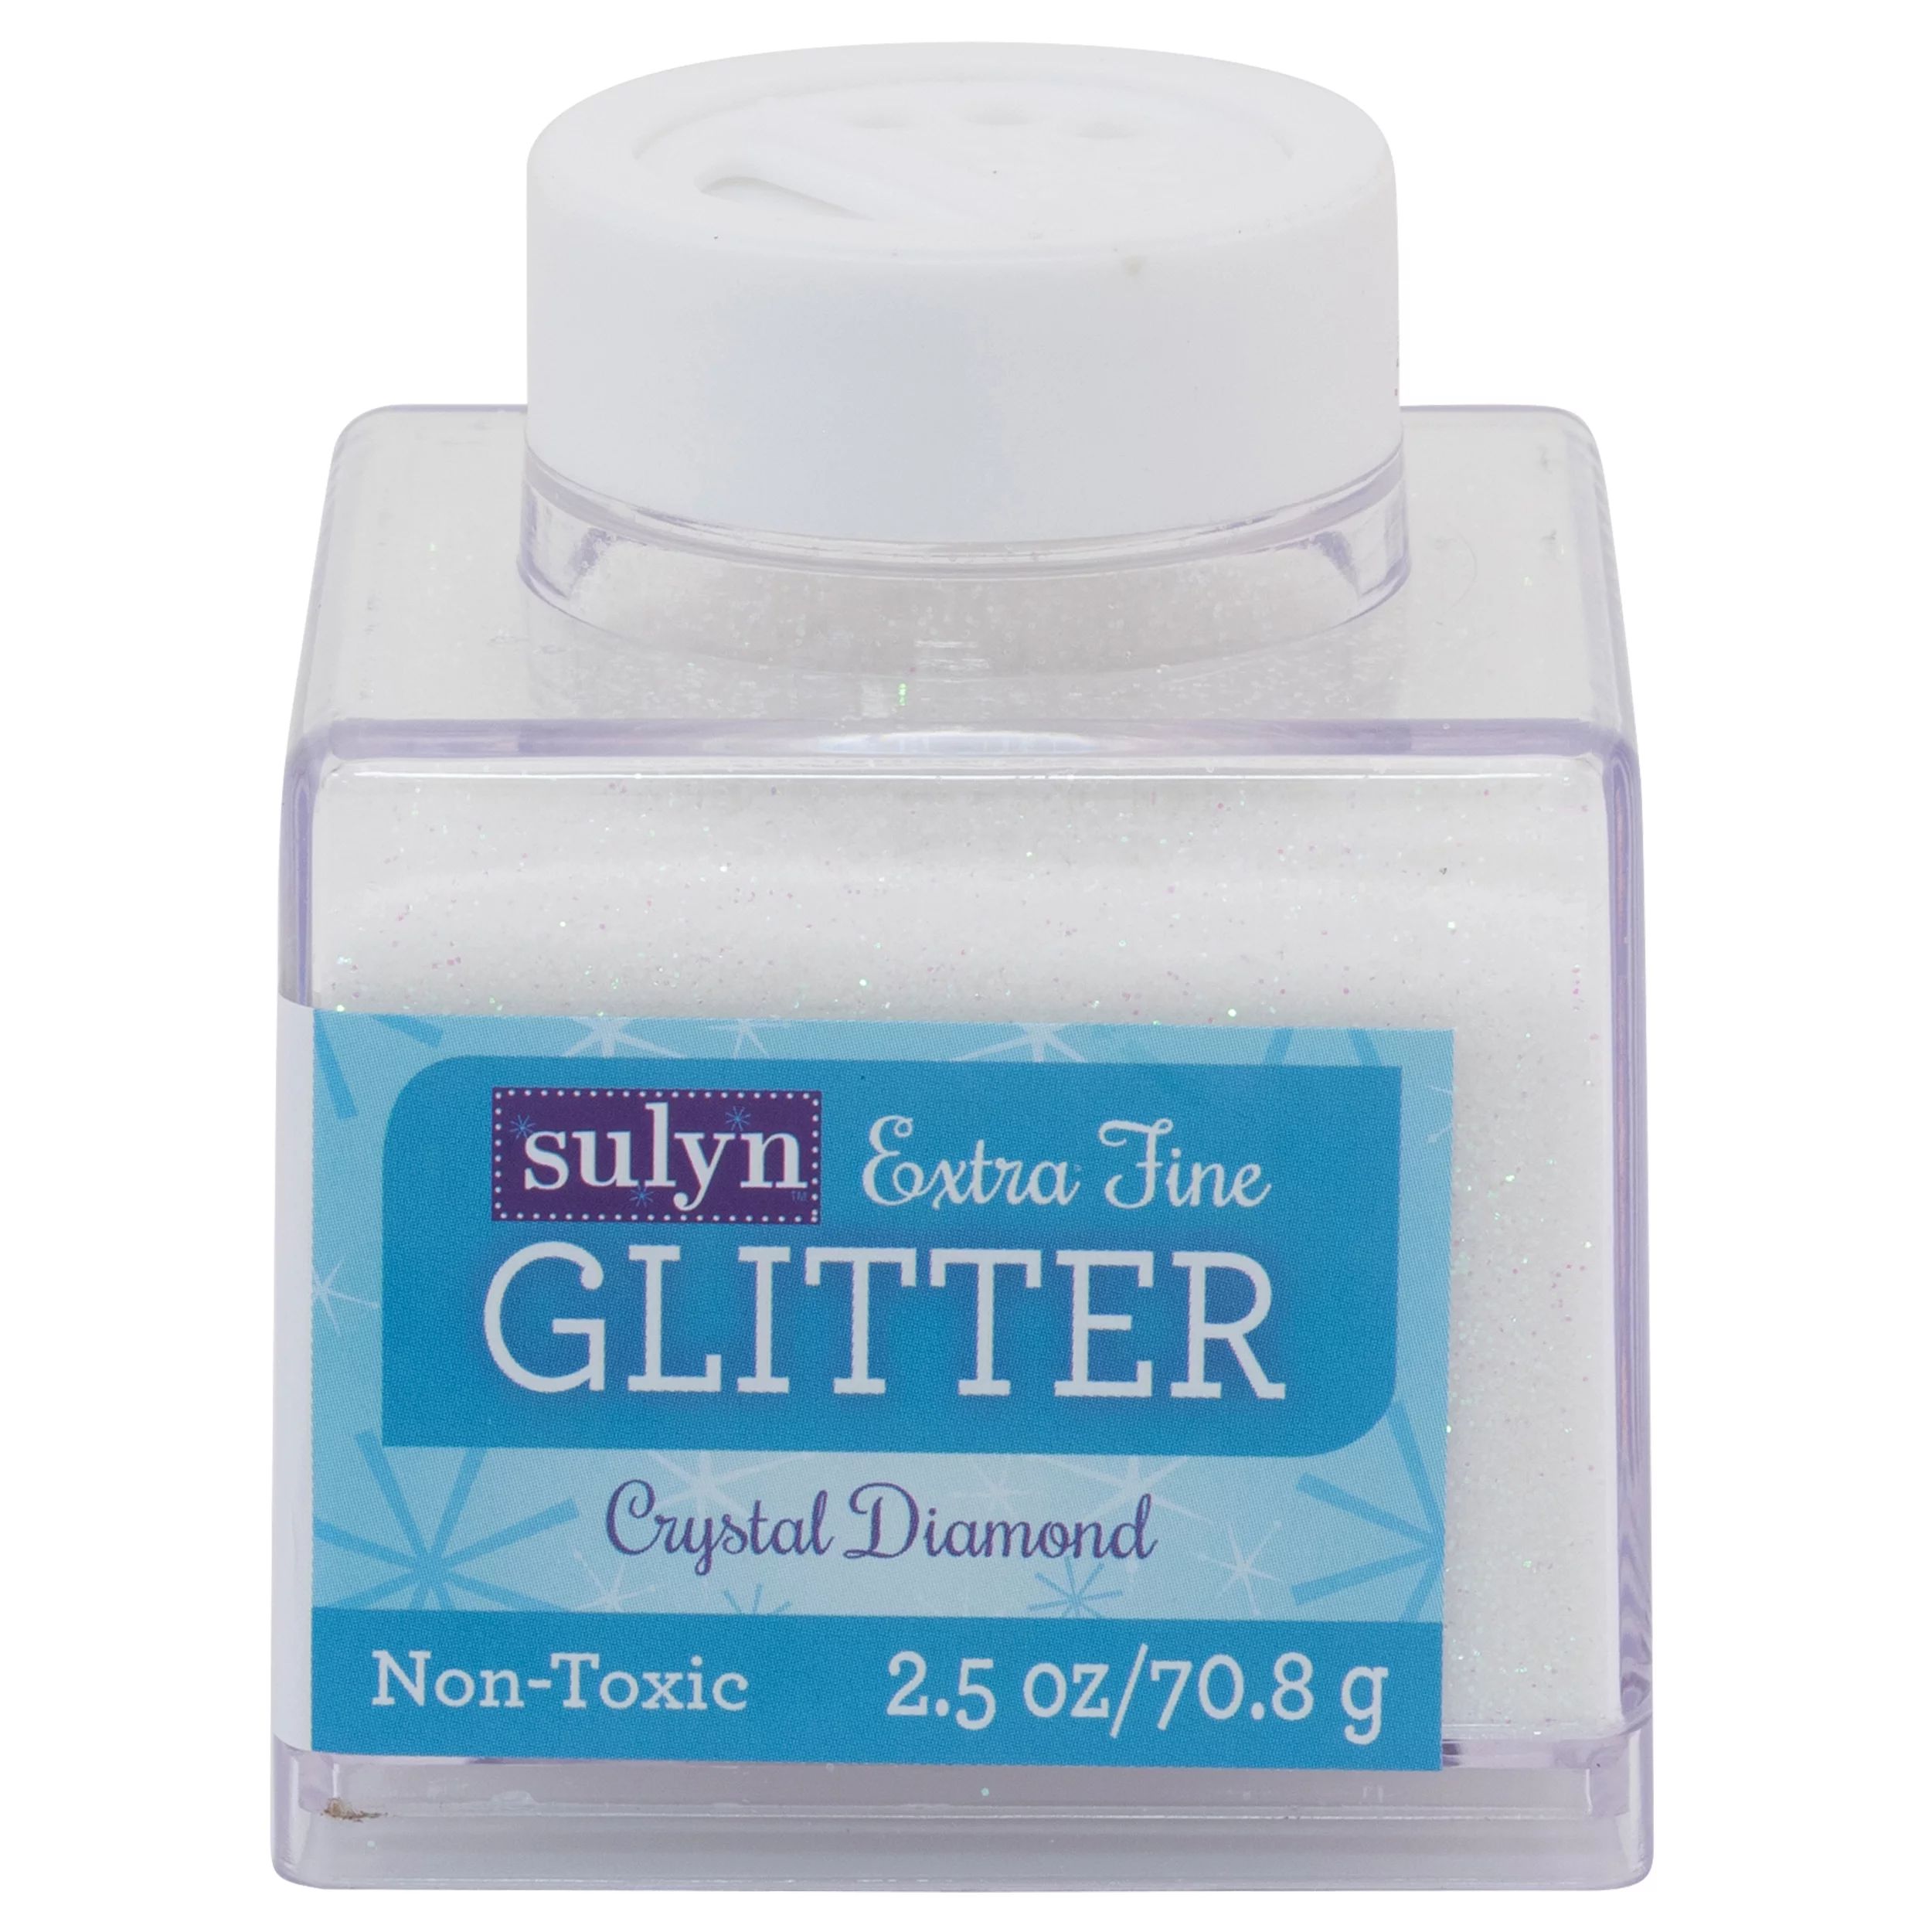 Sulyn Extra Fine Glitter for Crafts, White Crystal Diamond, 2.5 oz | Walmart (US)